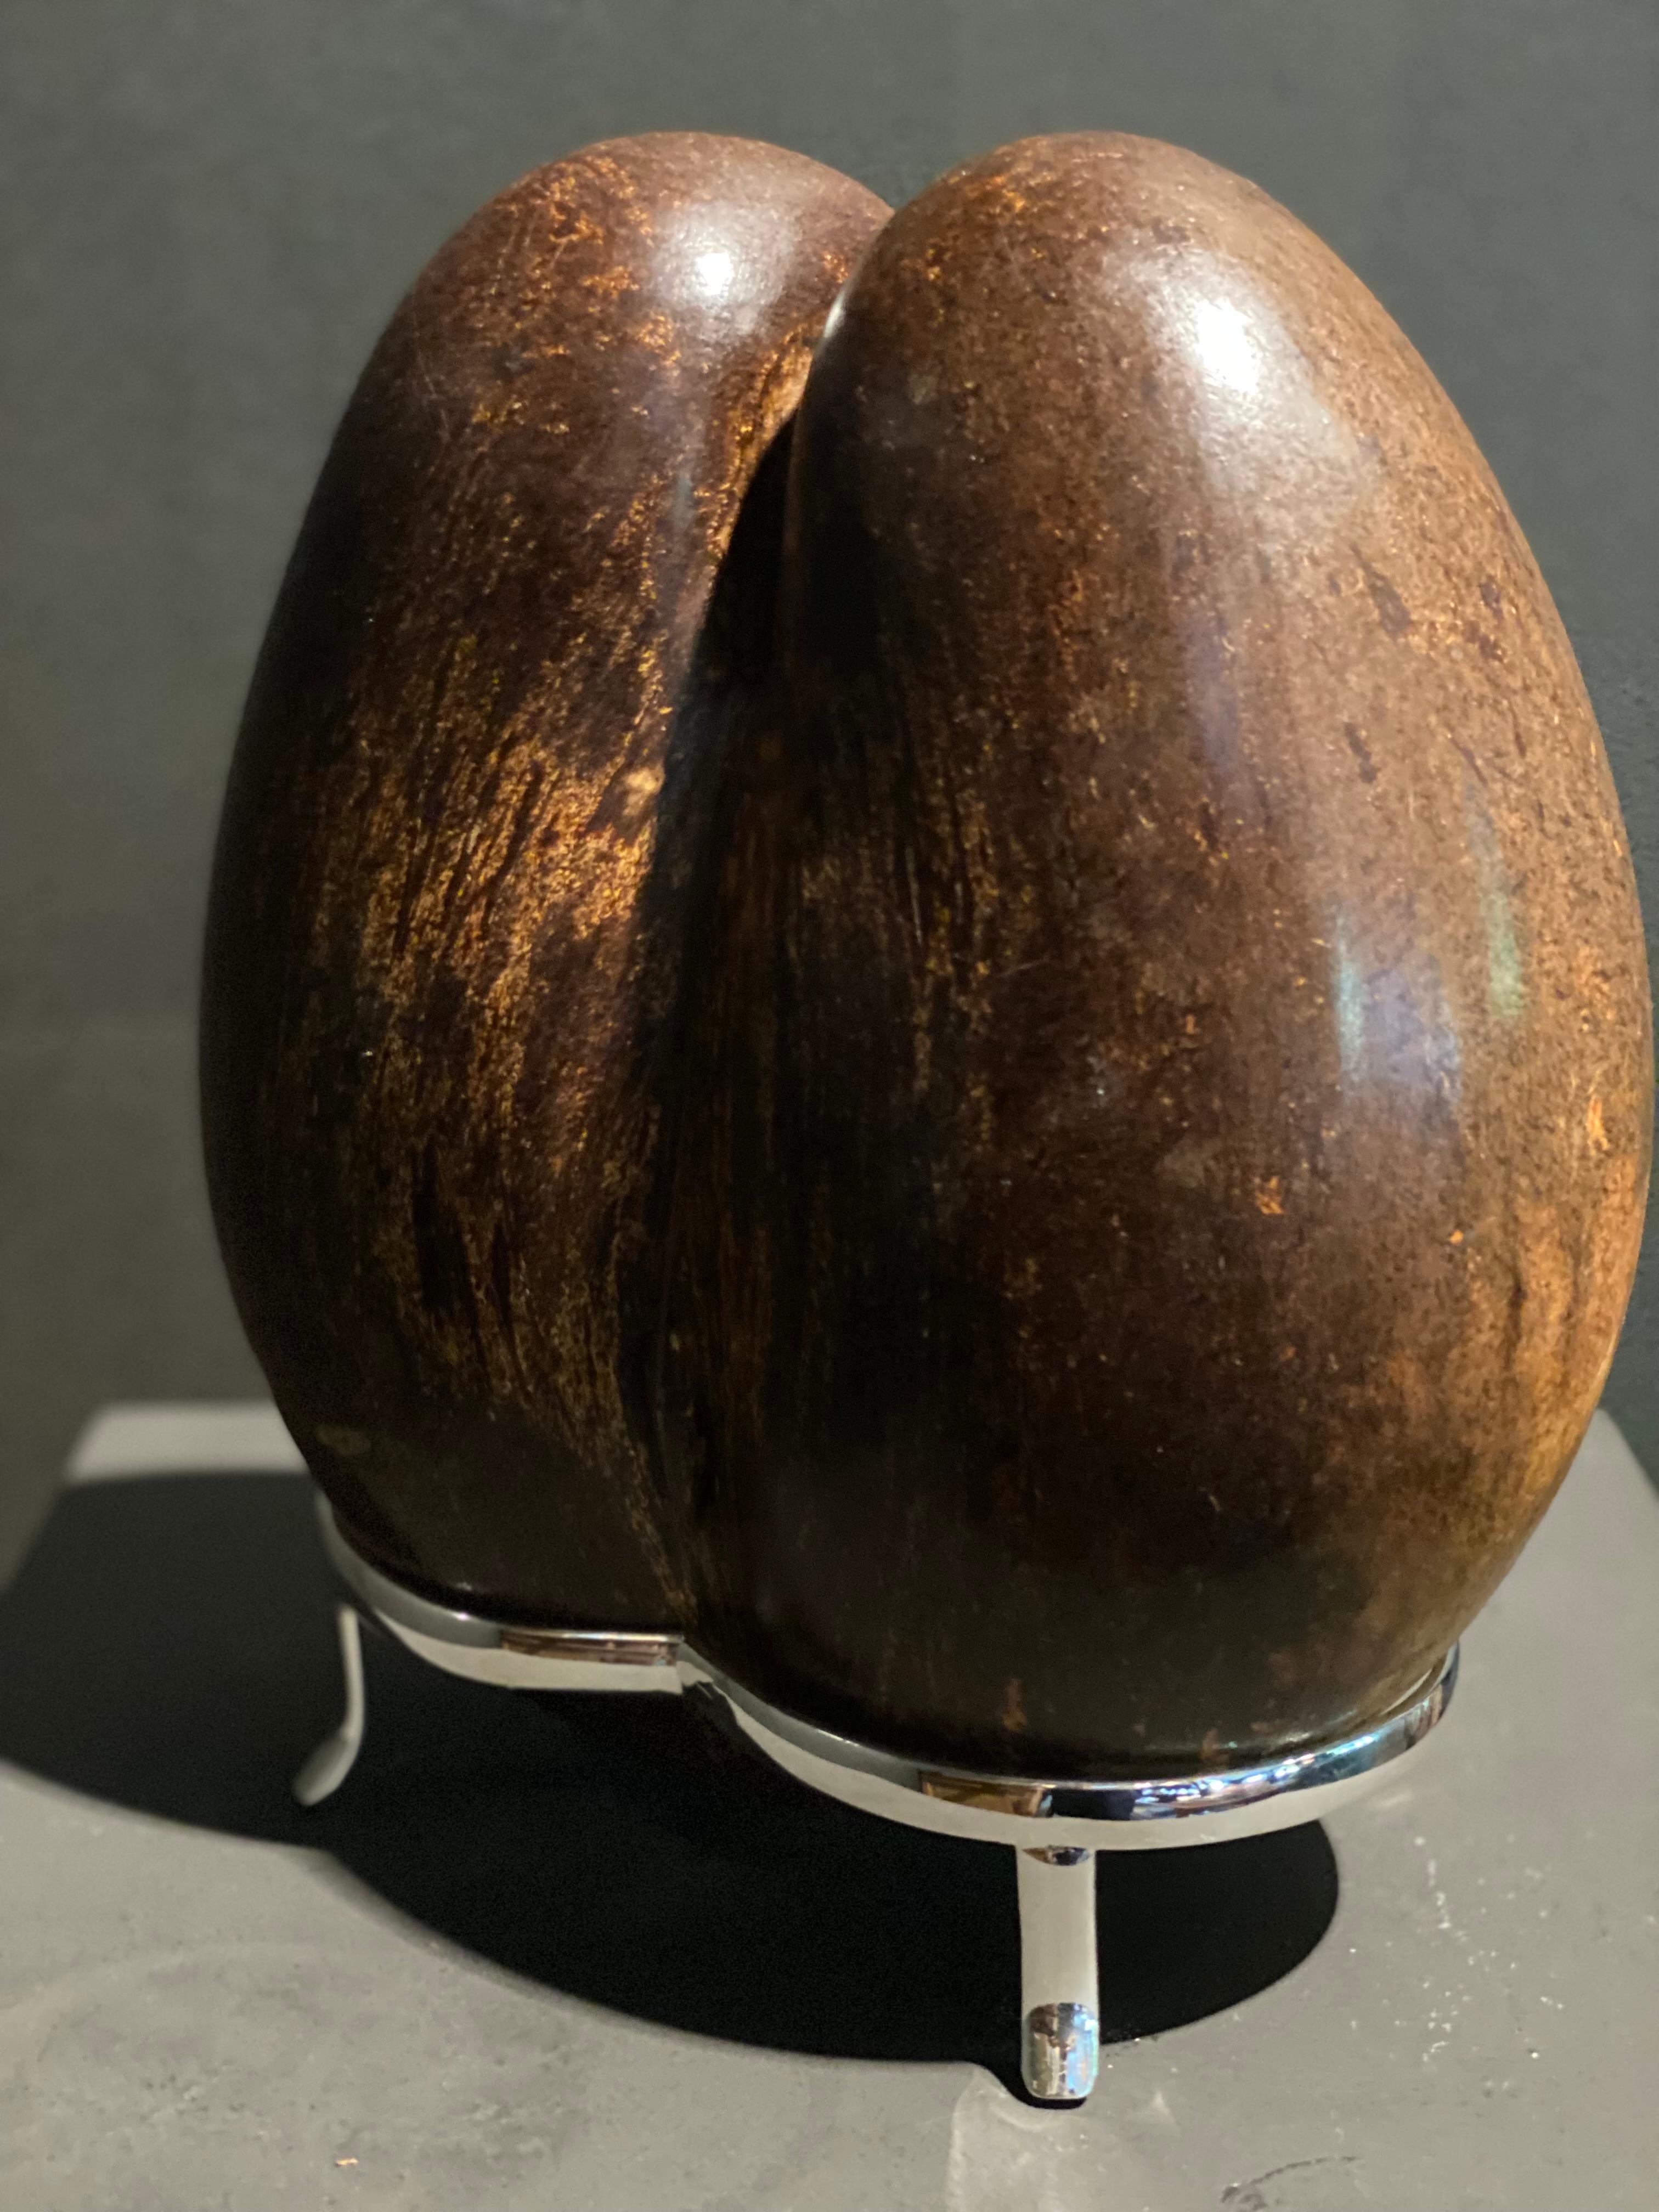 Polished Coco de Mer from the Seychelles